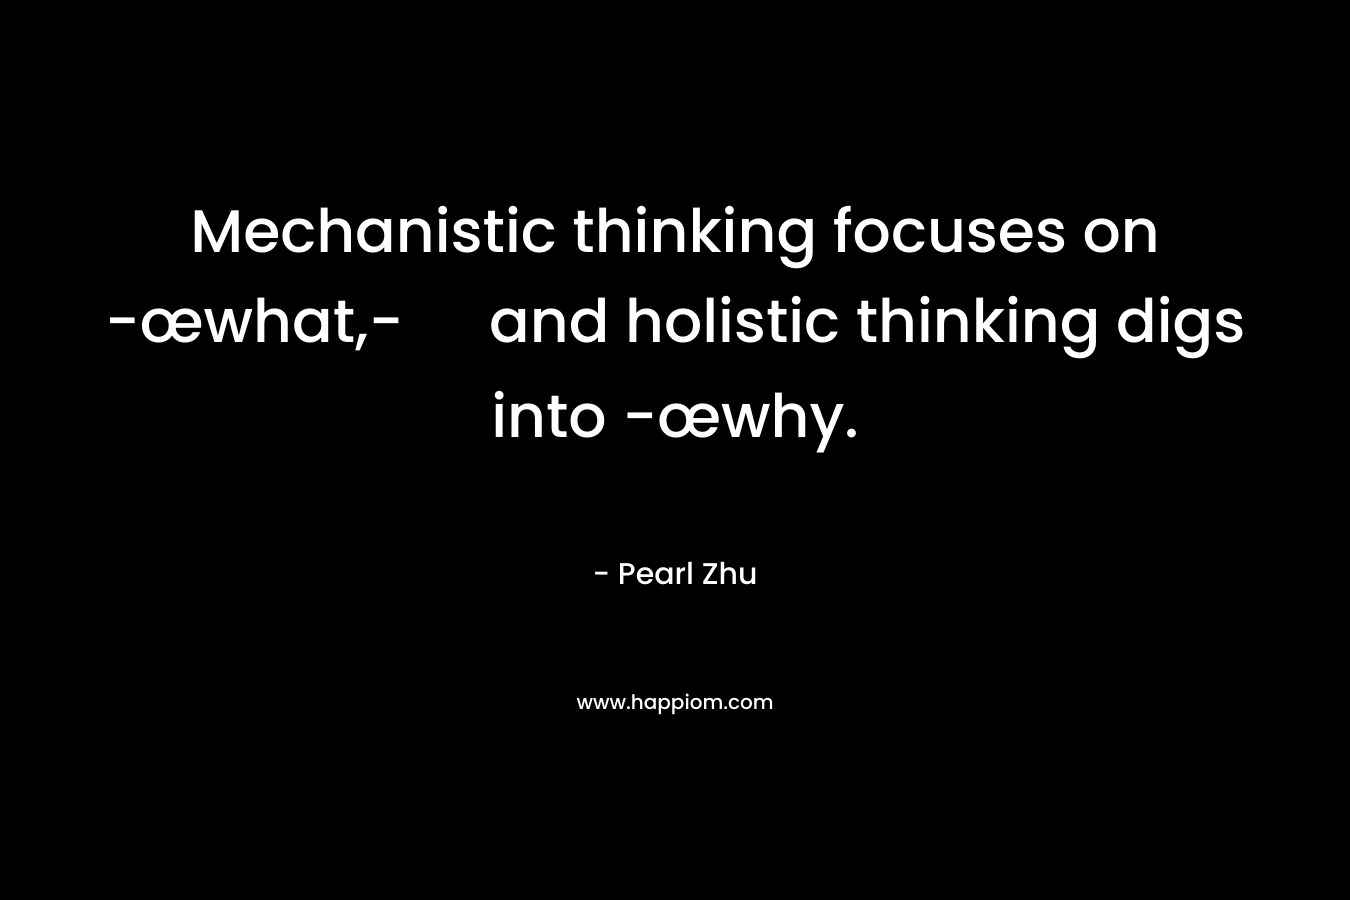 Mechanistic thinking focuses on -œwhat,- and holistic thinking digs into -œwhy.